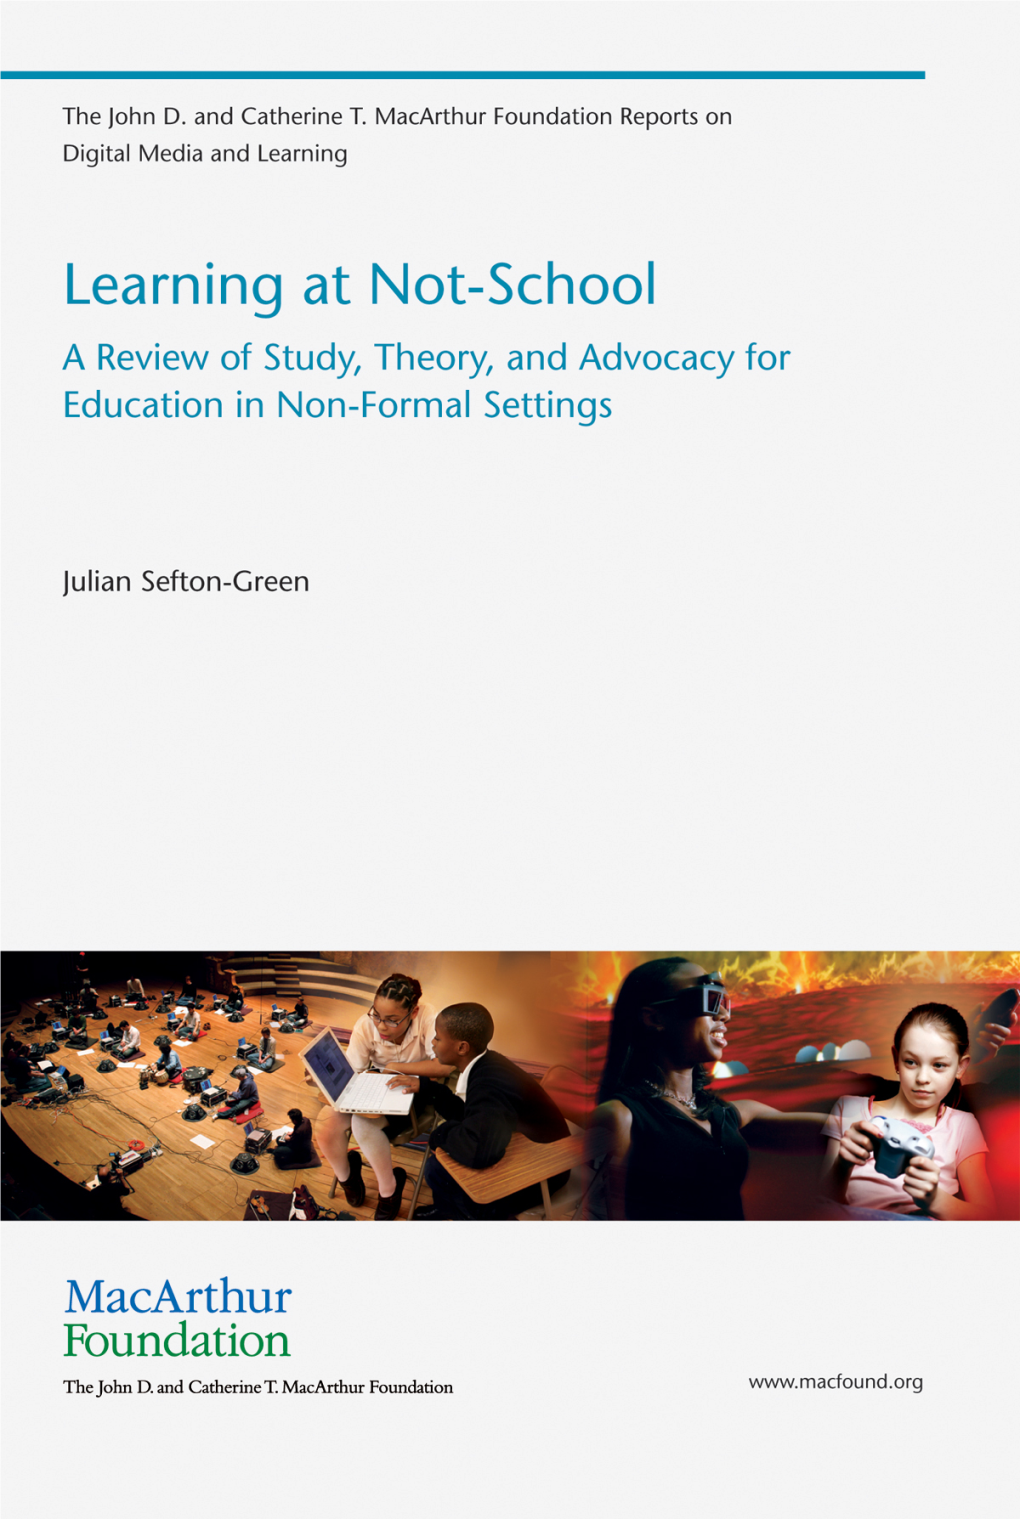 Learning at Not-School